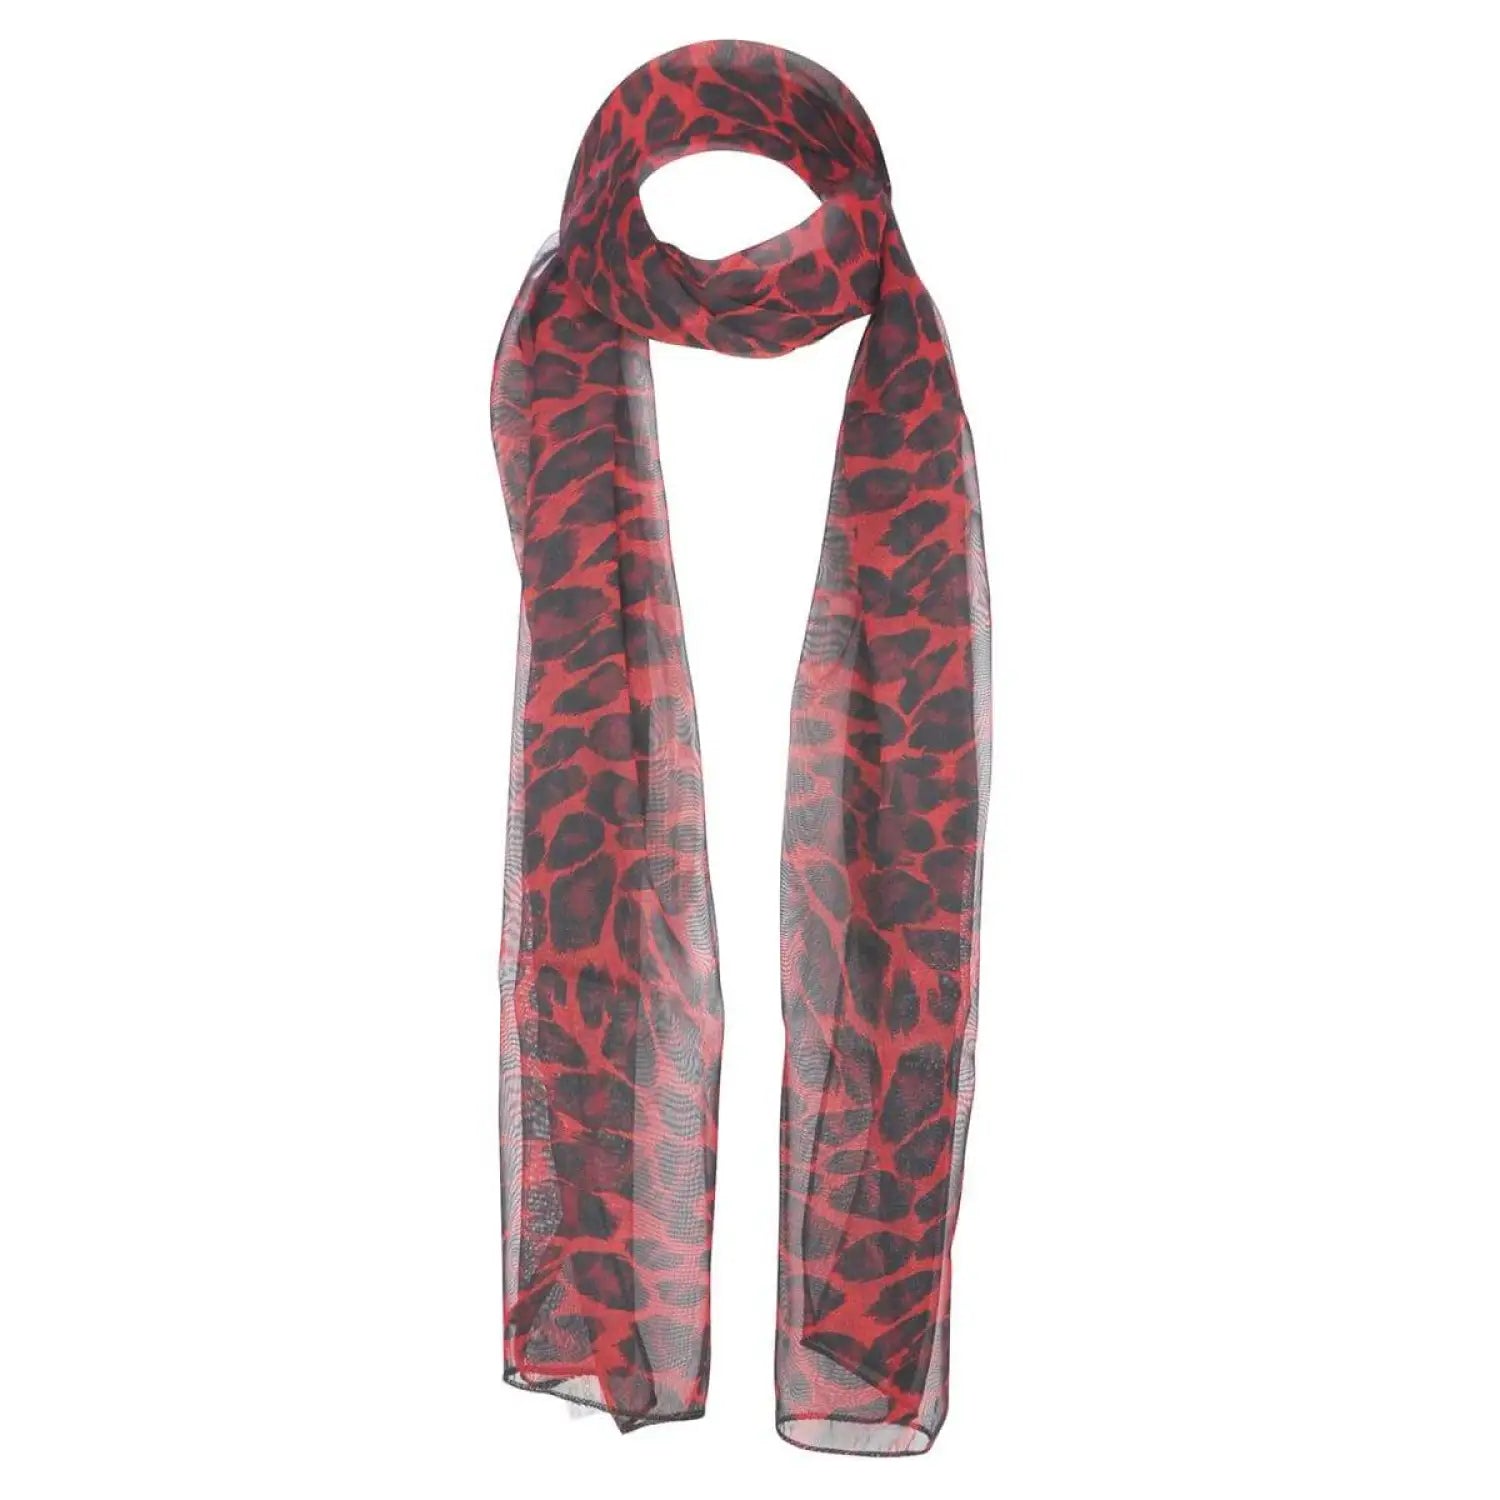 Stylish Leopard Print Chiffon Scarf with Red and Black Design